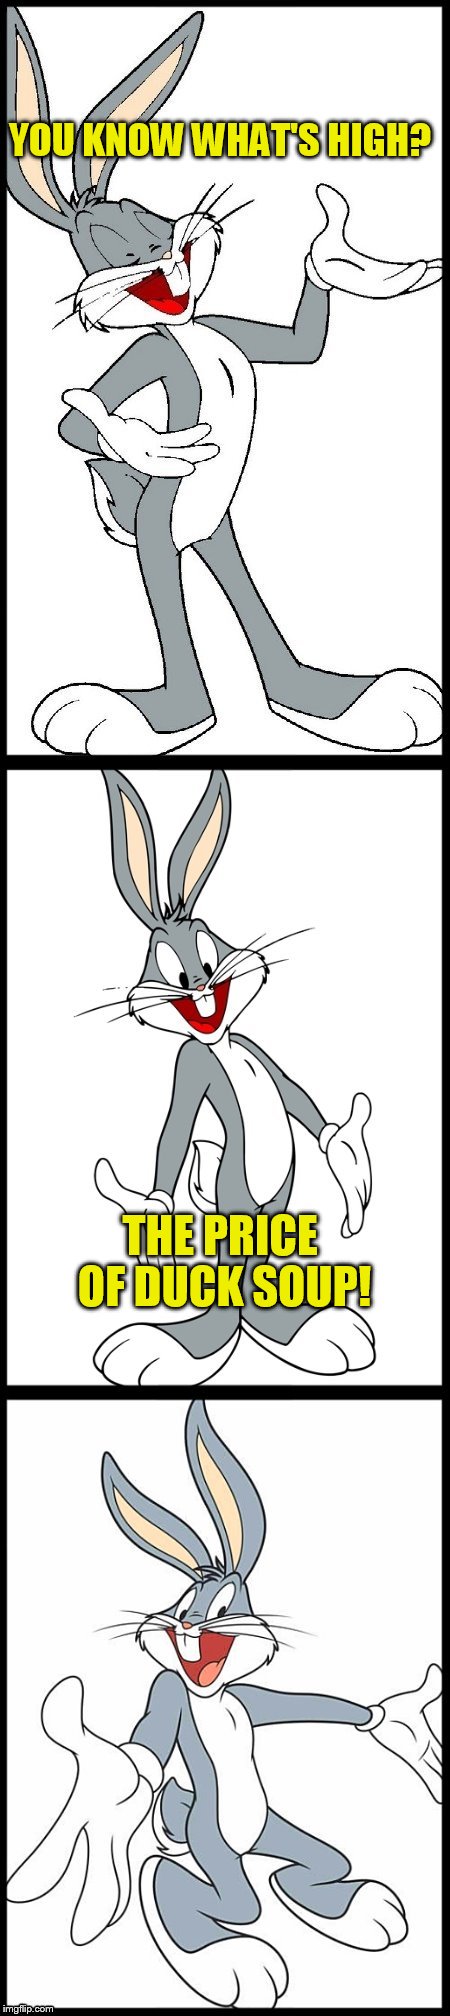 Bad Bugs Bunny Pun | YOU KNOW WHAT'S HIGH? THE PRICE OF DUCK SOUP! | image tagged in bad bugs bunny pun | made w/ Imgflip meme maker